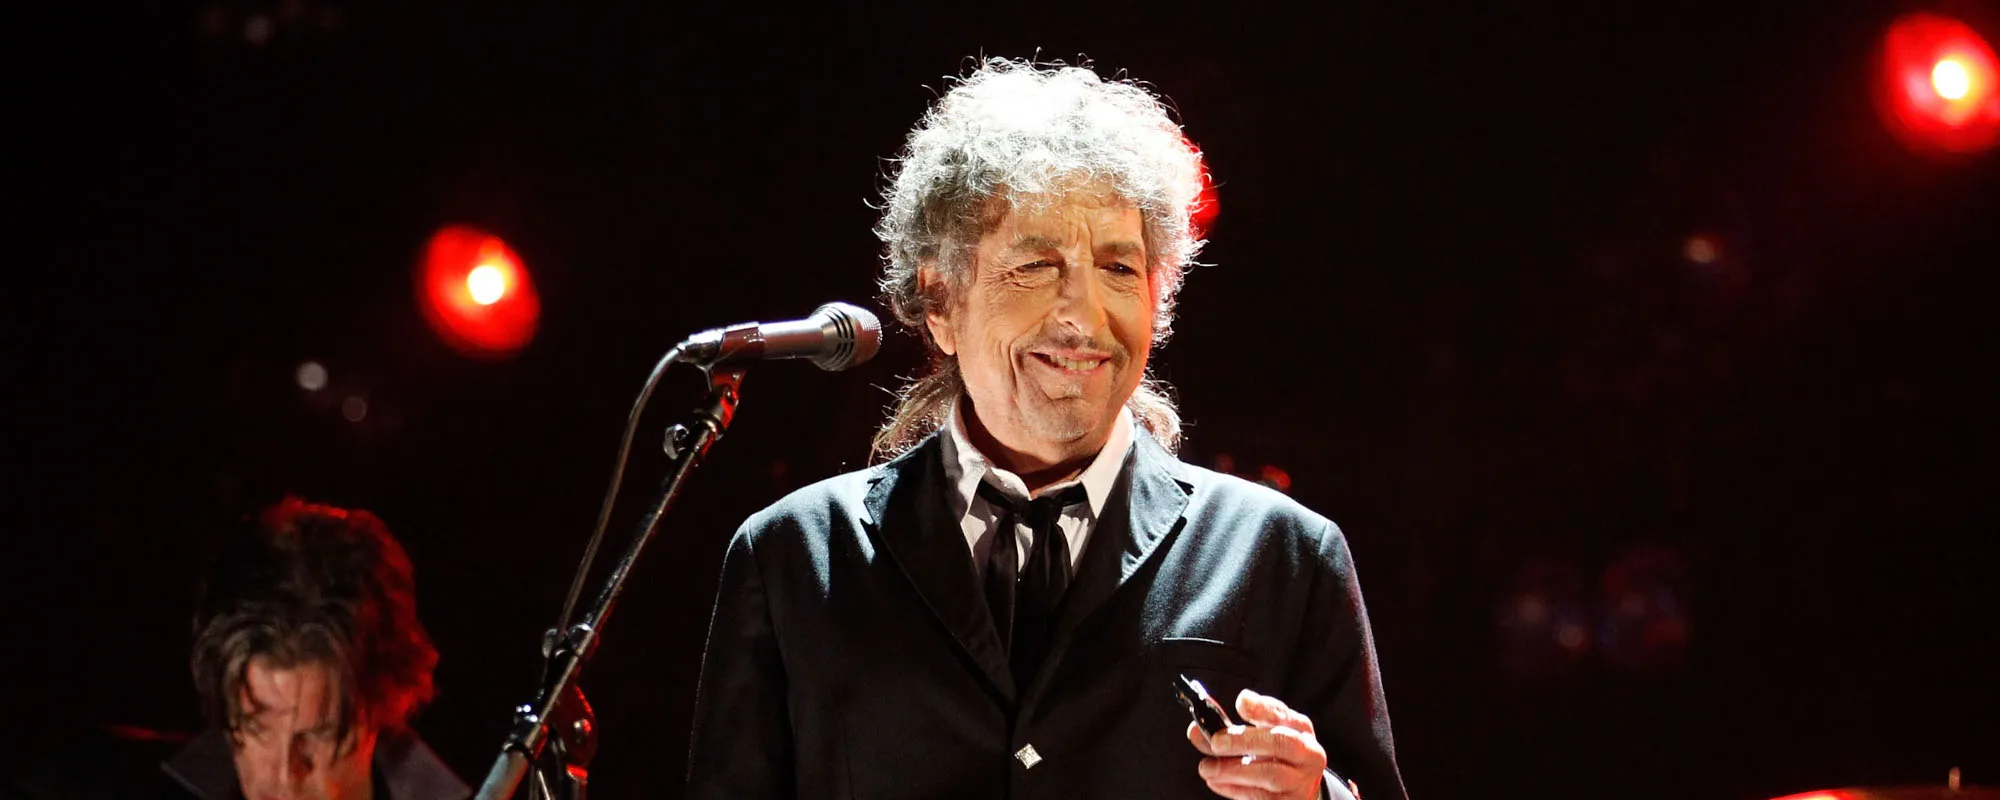 Bob Dylan to Release ‘Shadow Kingdom’ as Concert Film and Album